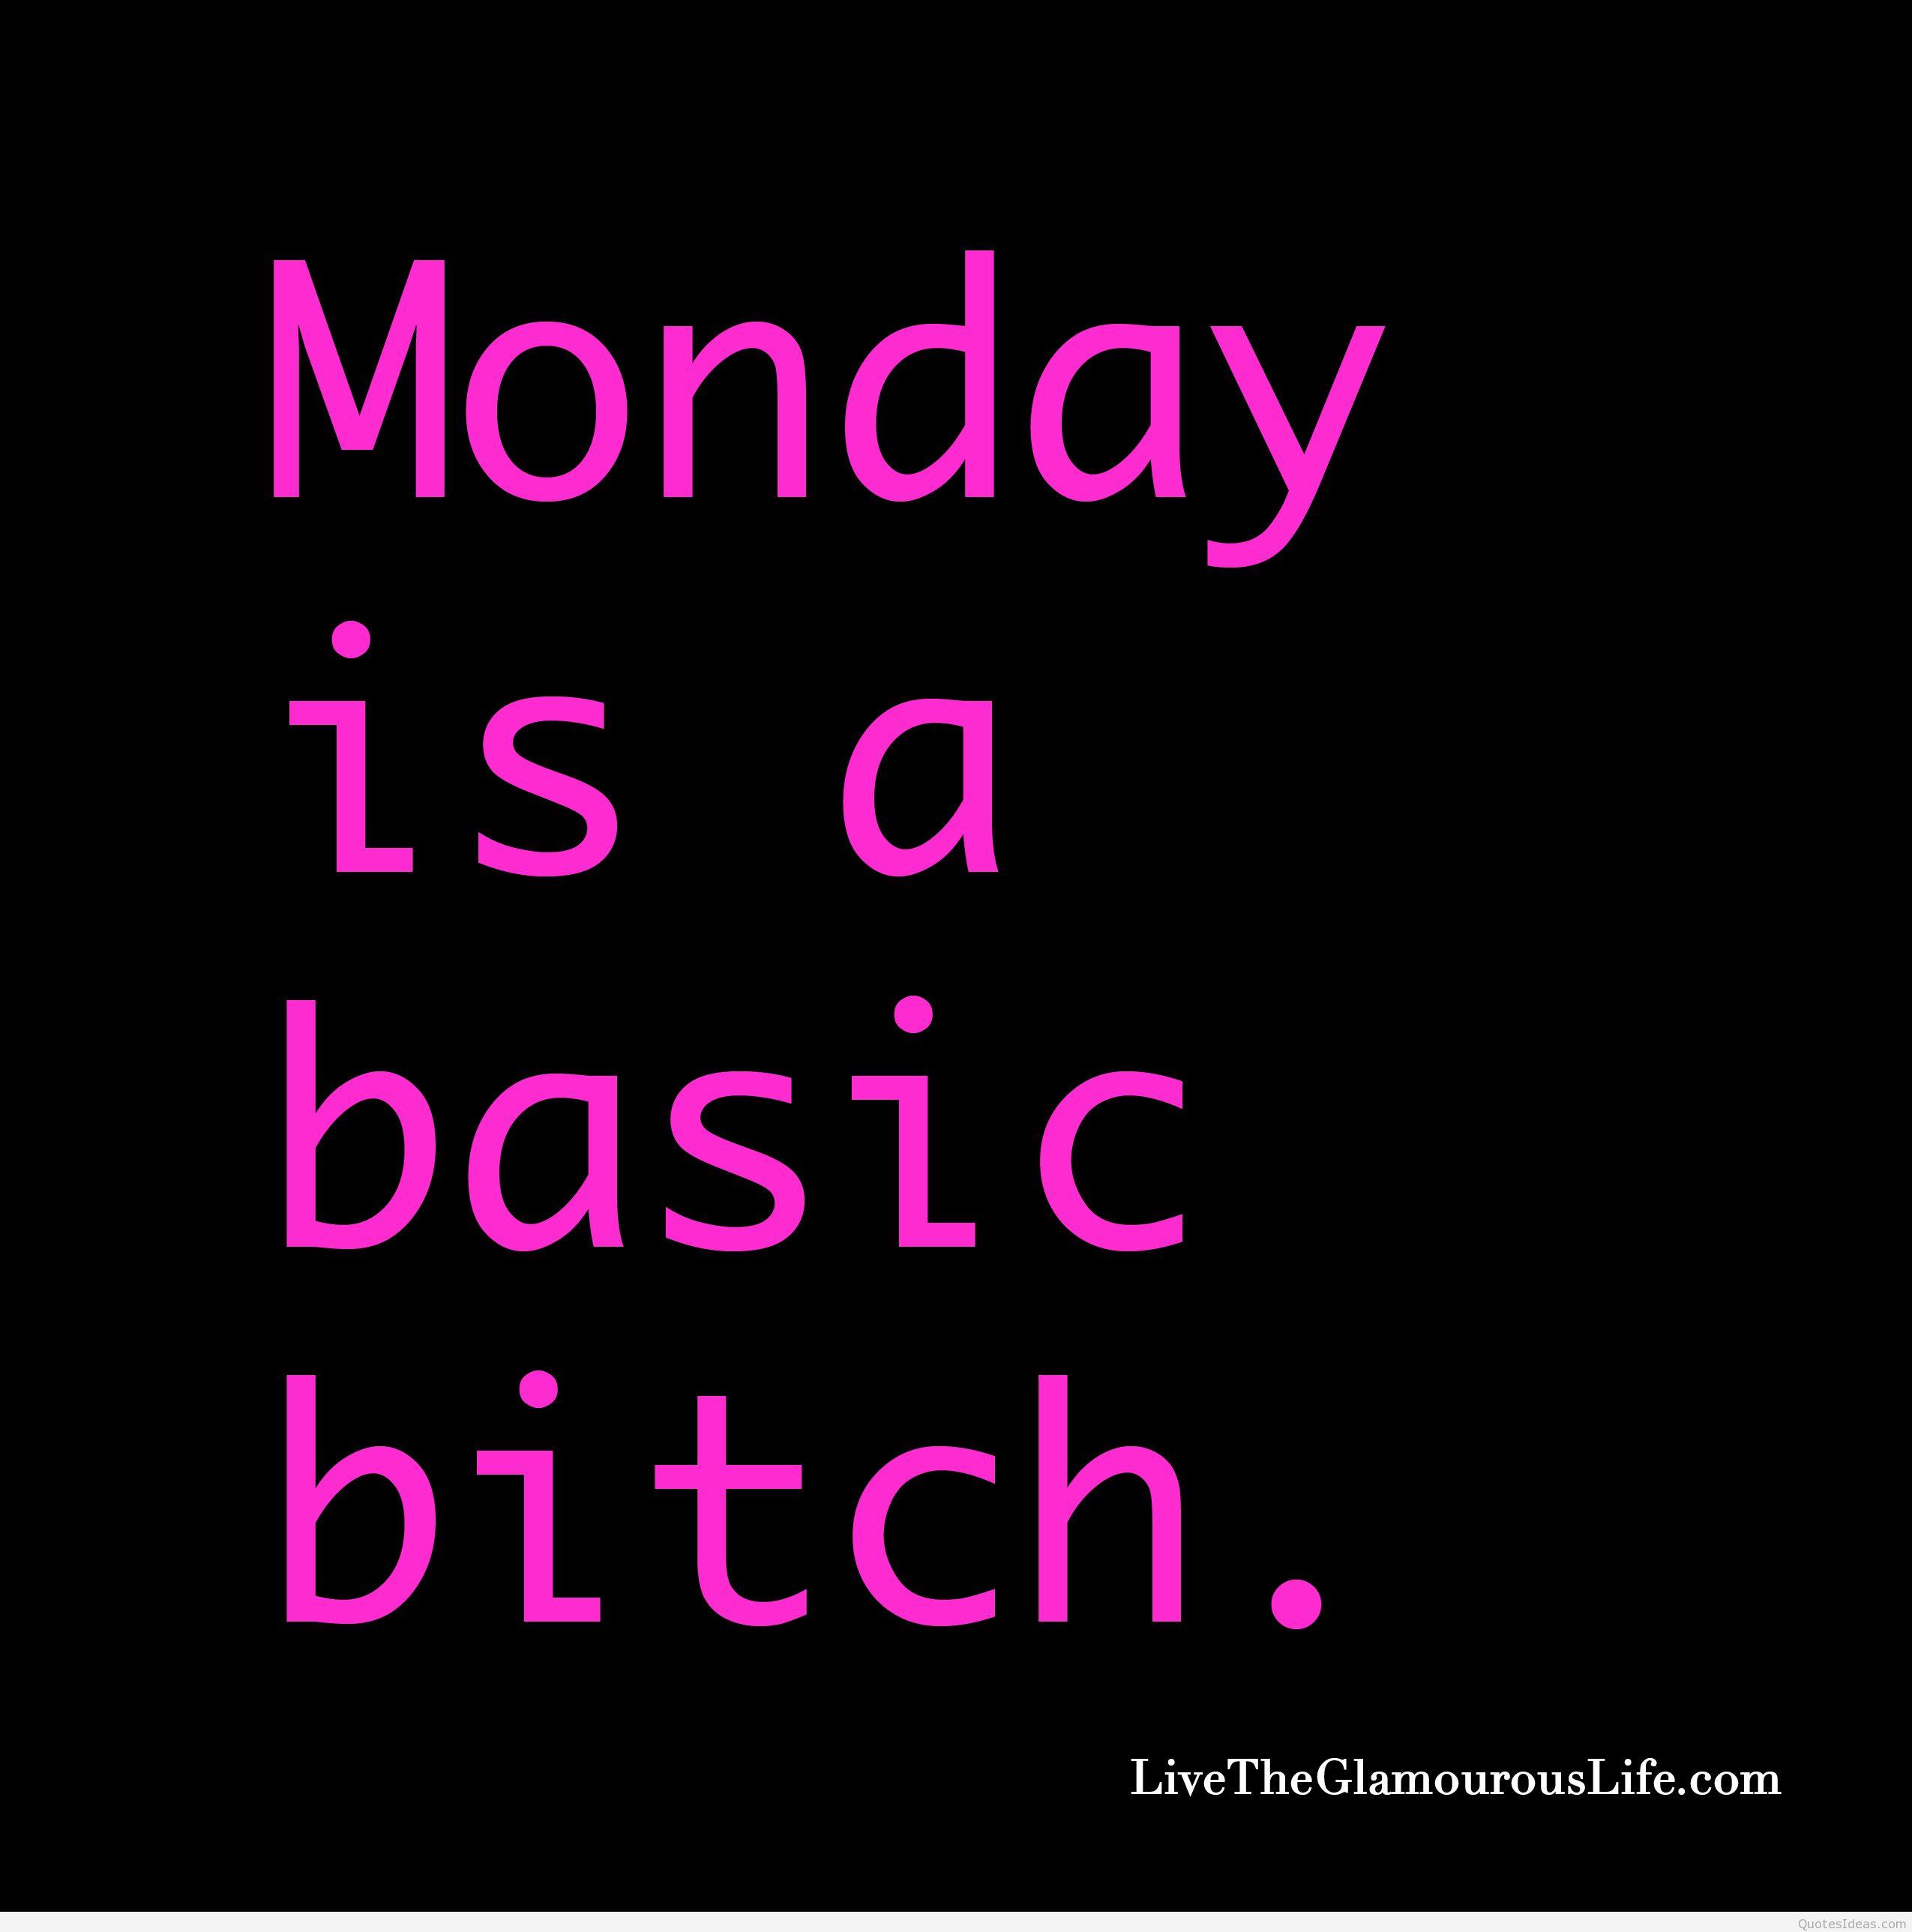 I Hate Mondays Quotes Tumblr Hate monday quotes t